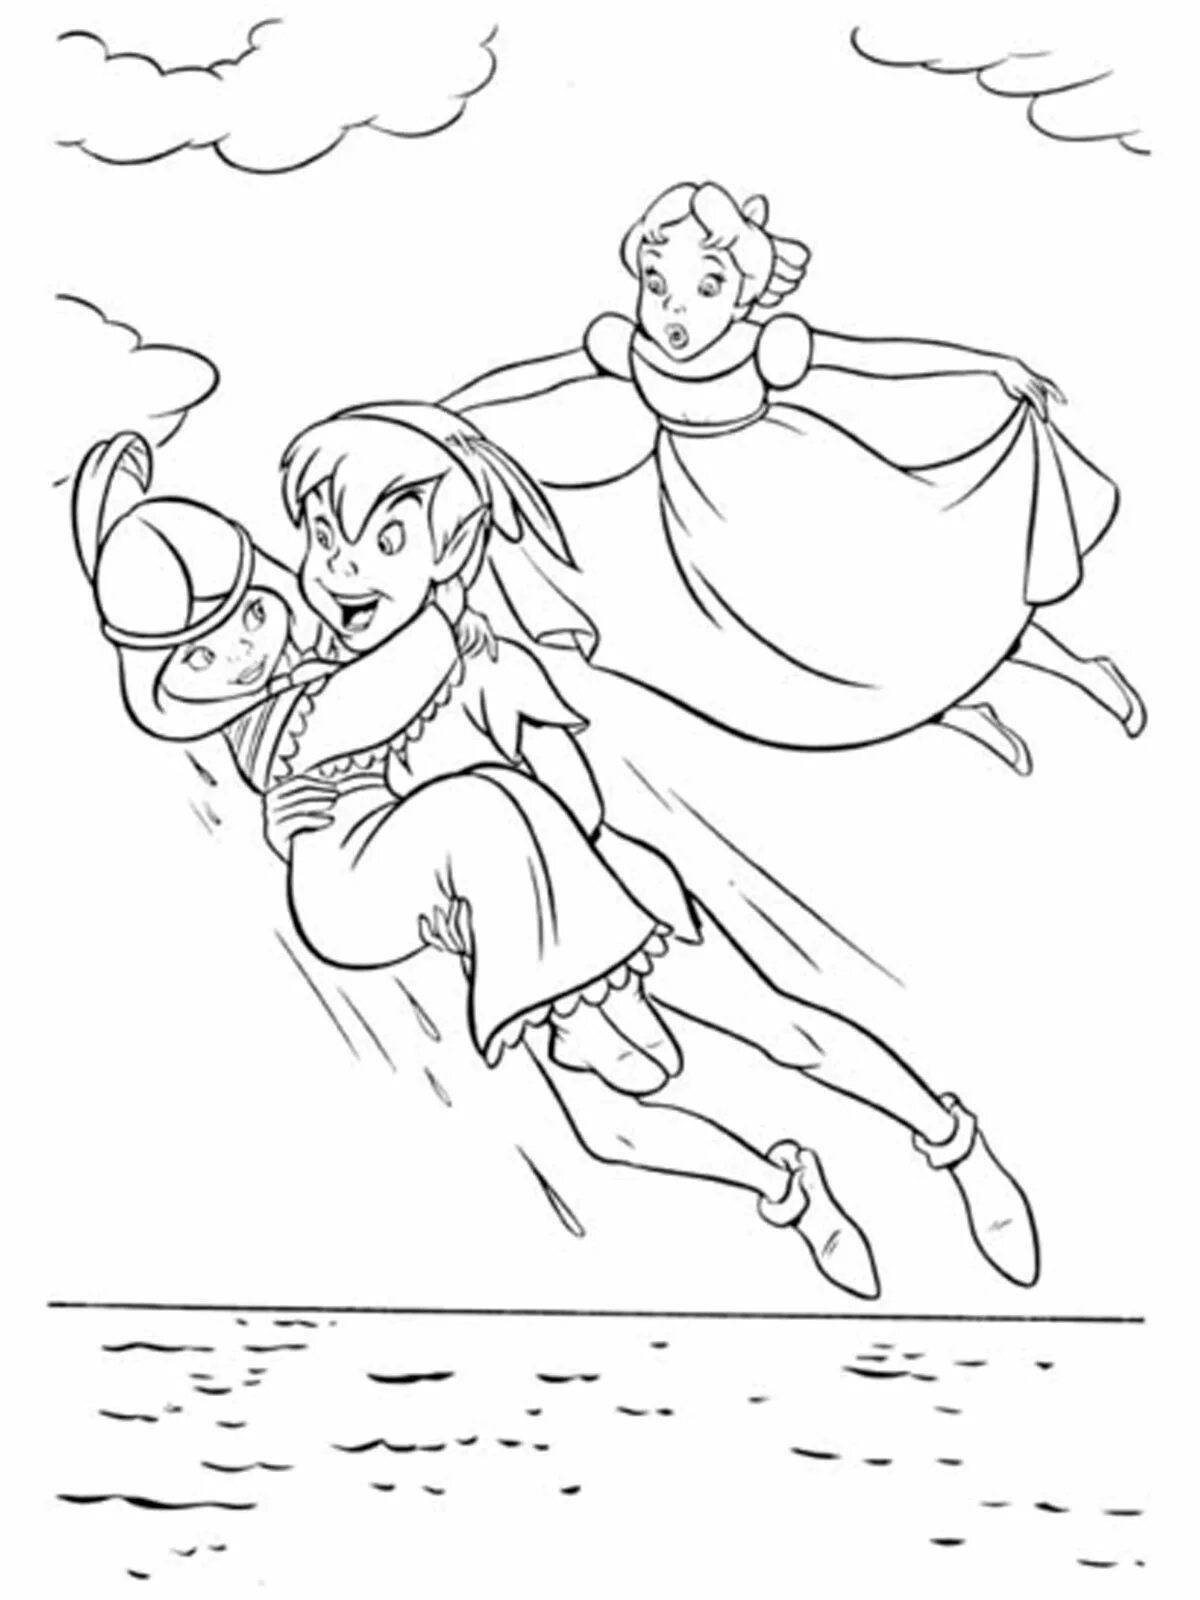 Witty peter pan coloring page